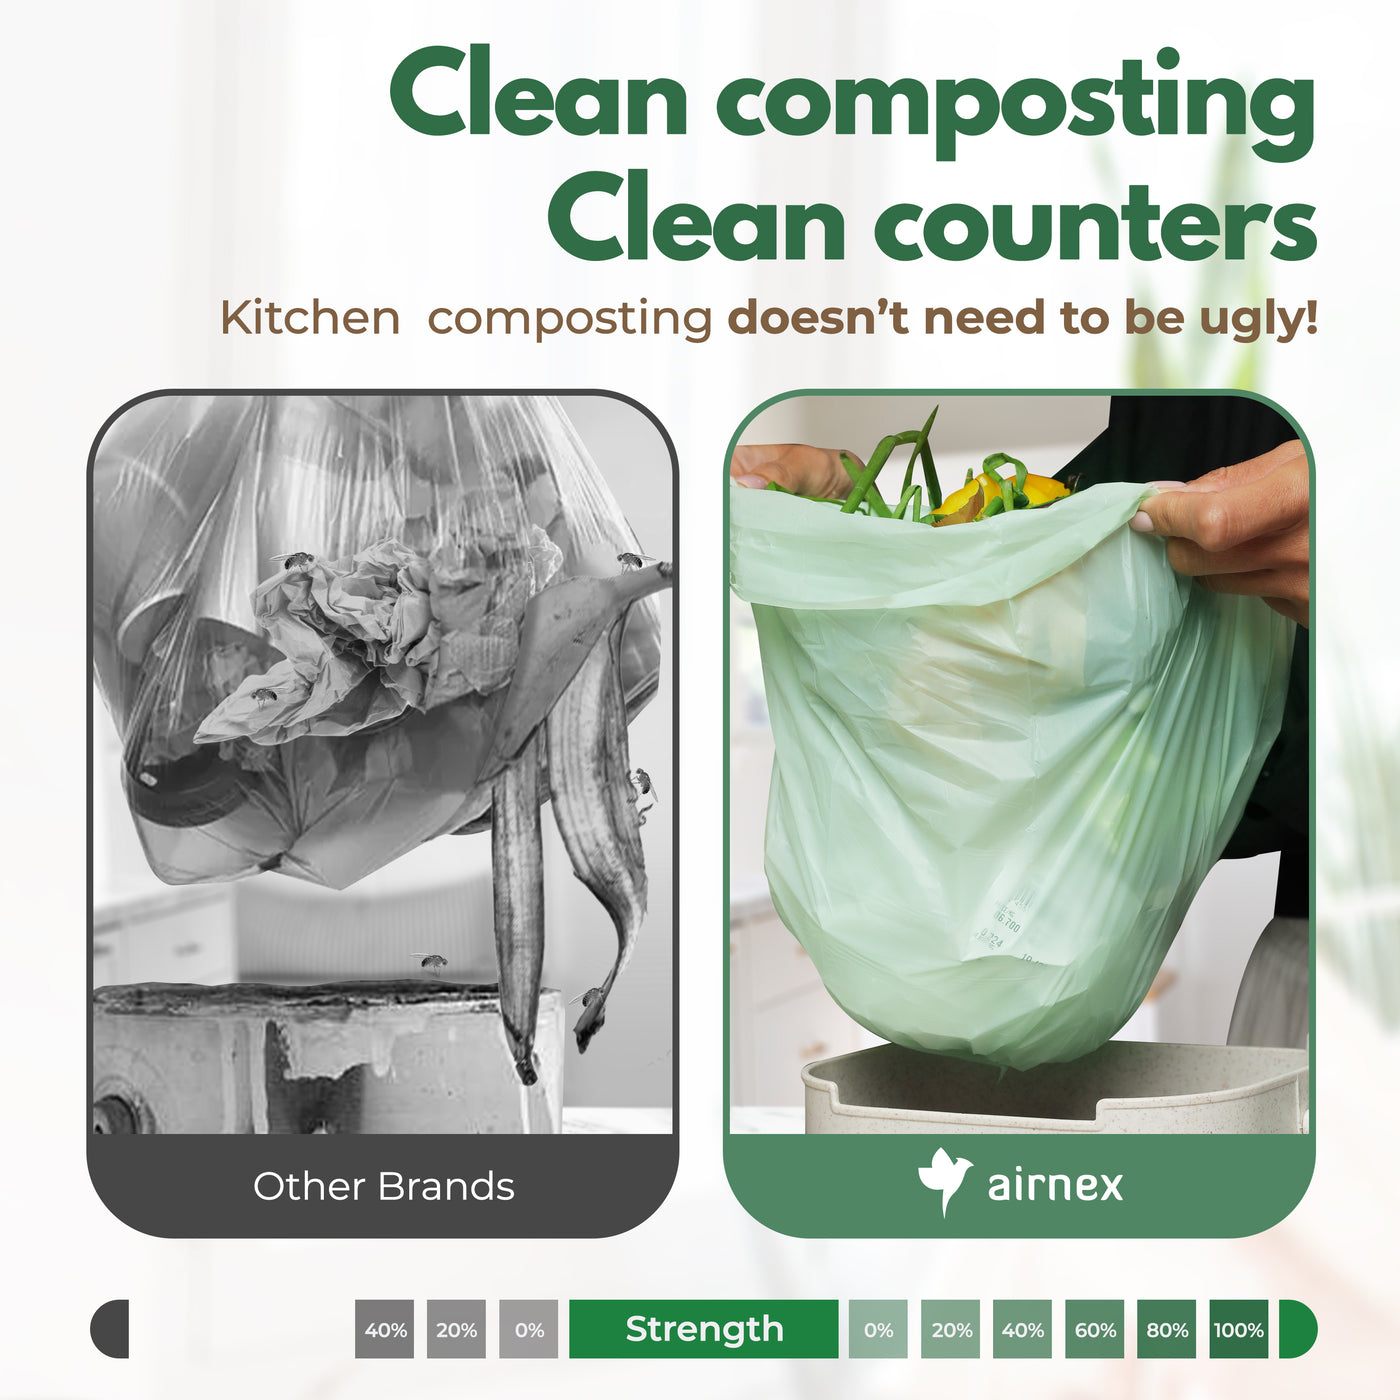 AIRNEX Compostable Trash Bags Small 1.6 Gal - 50 Count Green Compost Bags for Countertop Bin made of Cornstarch - Food Waste Compostable Bags Leakproof & Tear Resistant